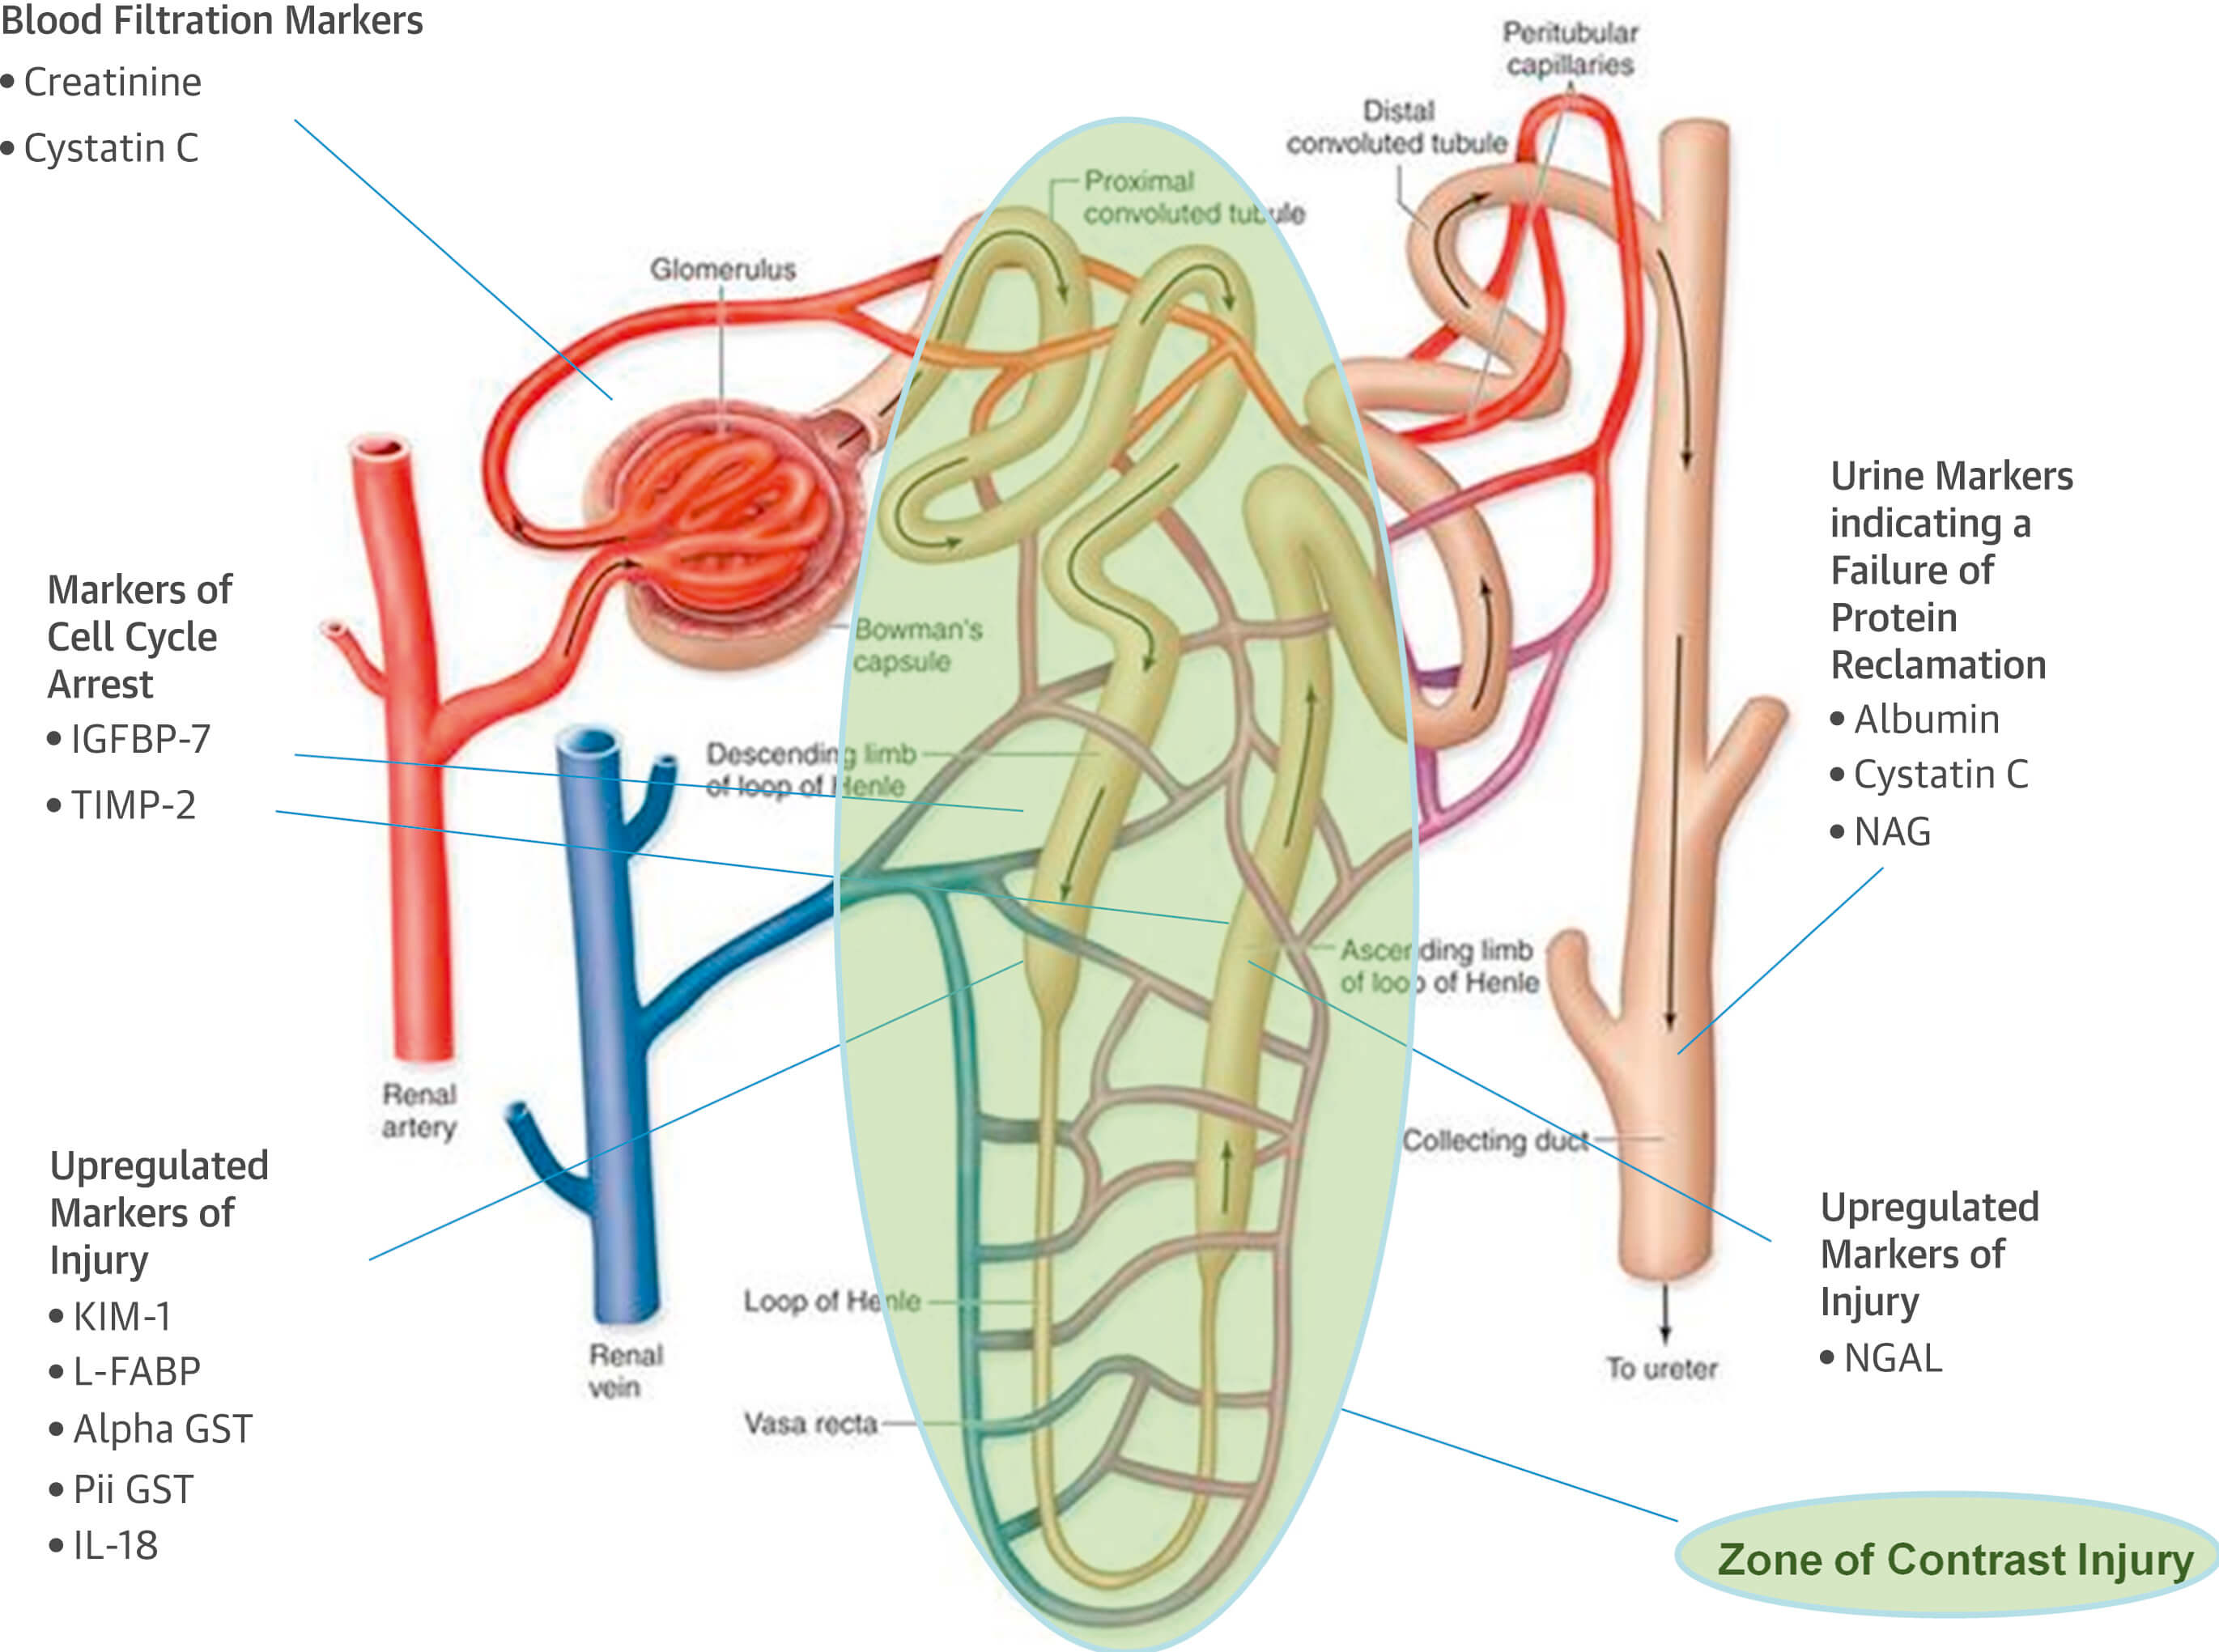 Anatomy of a Single Nephron and Location of Novel and Conventional Biomarkers of Renal Filtration and Tubular Epithelial Cell Damage.